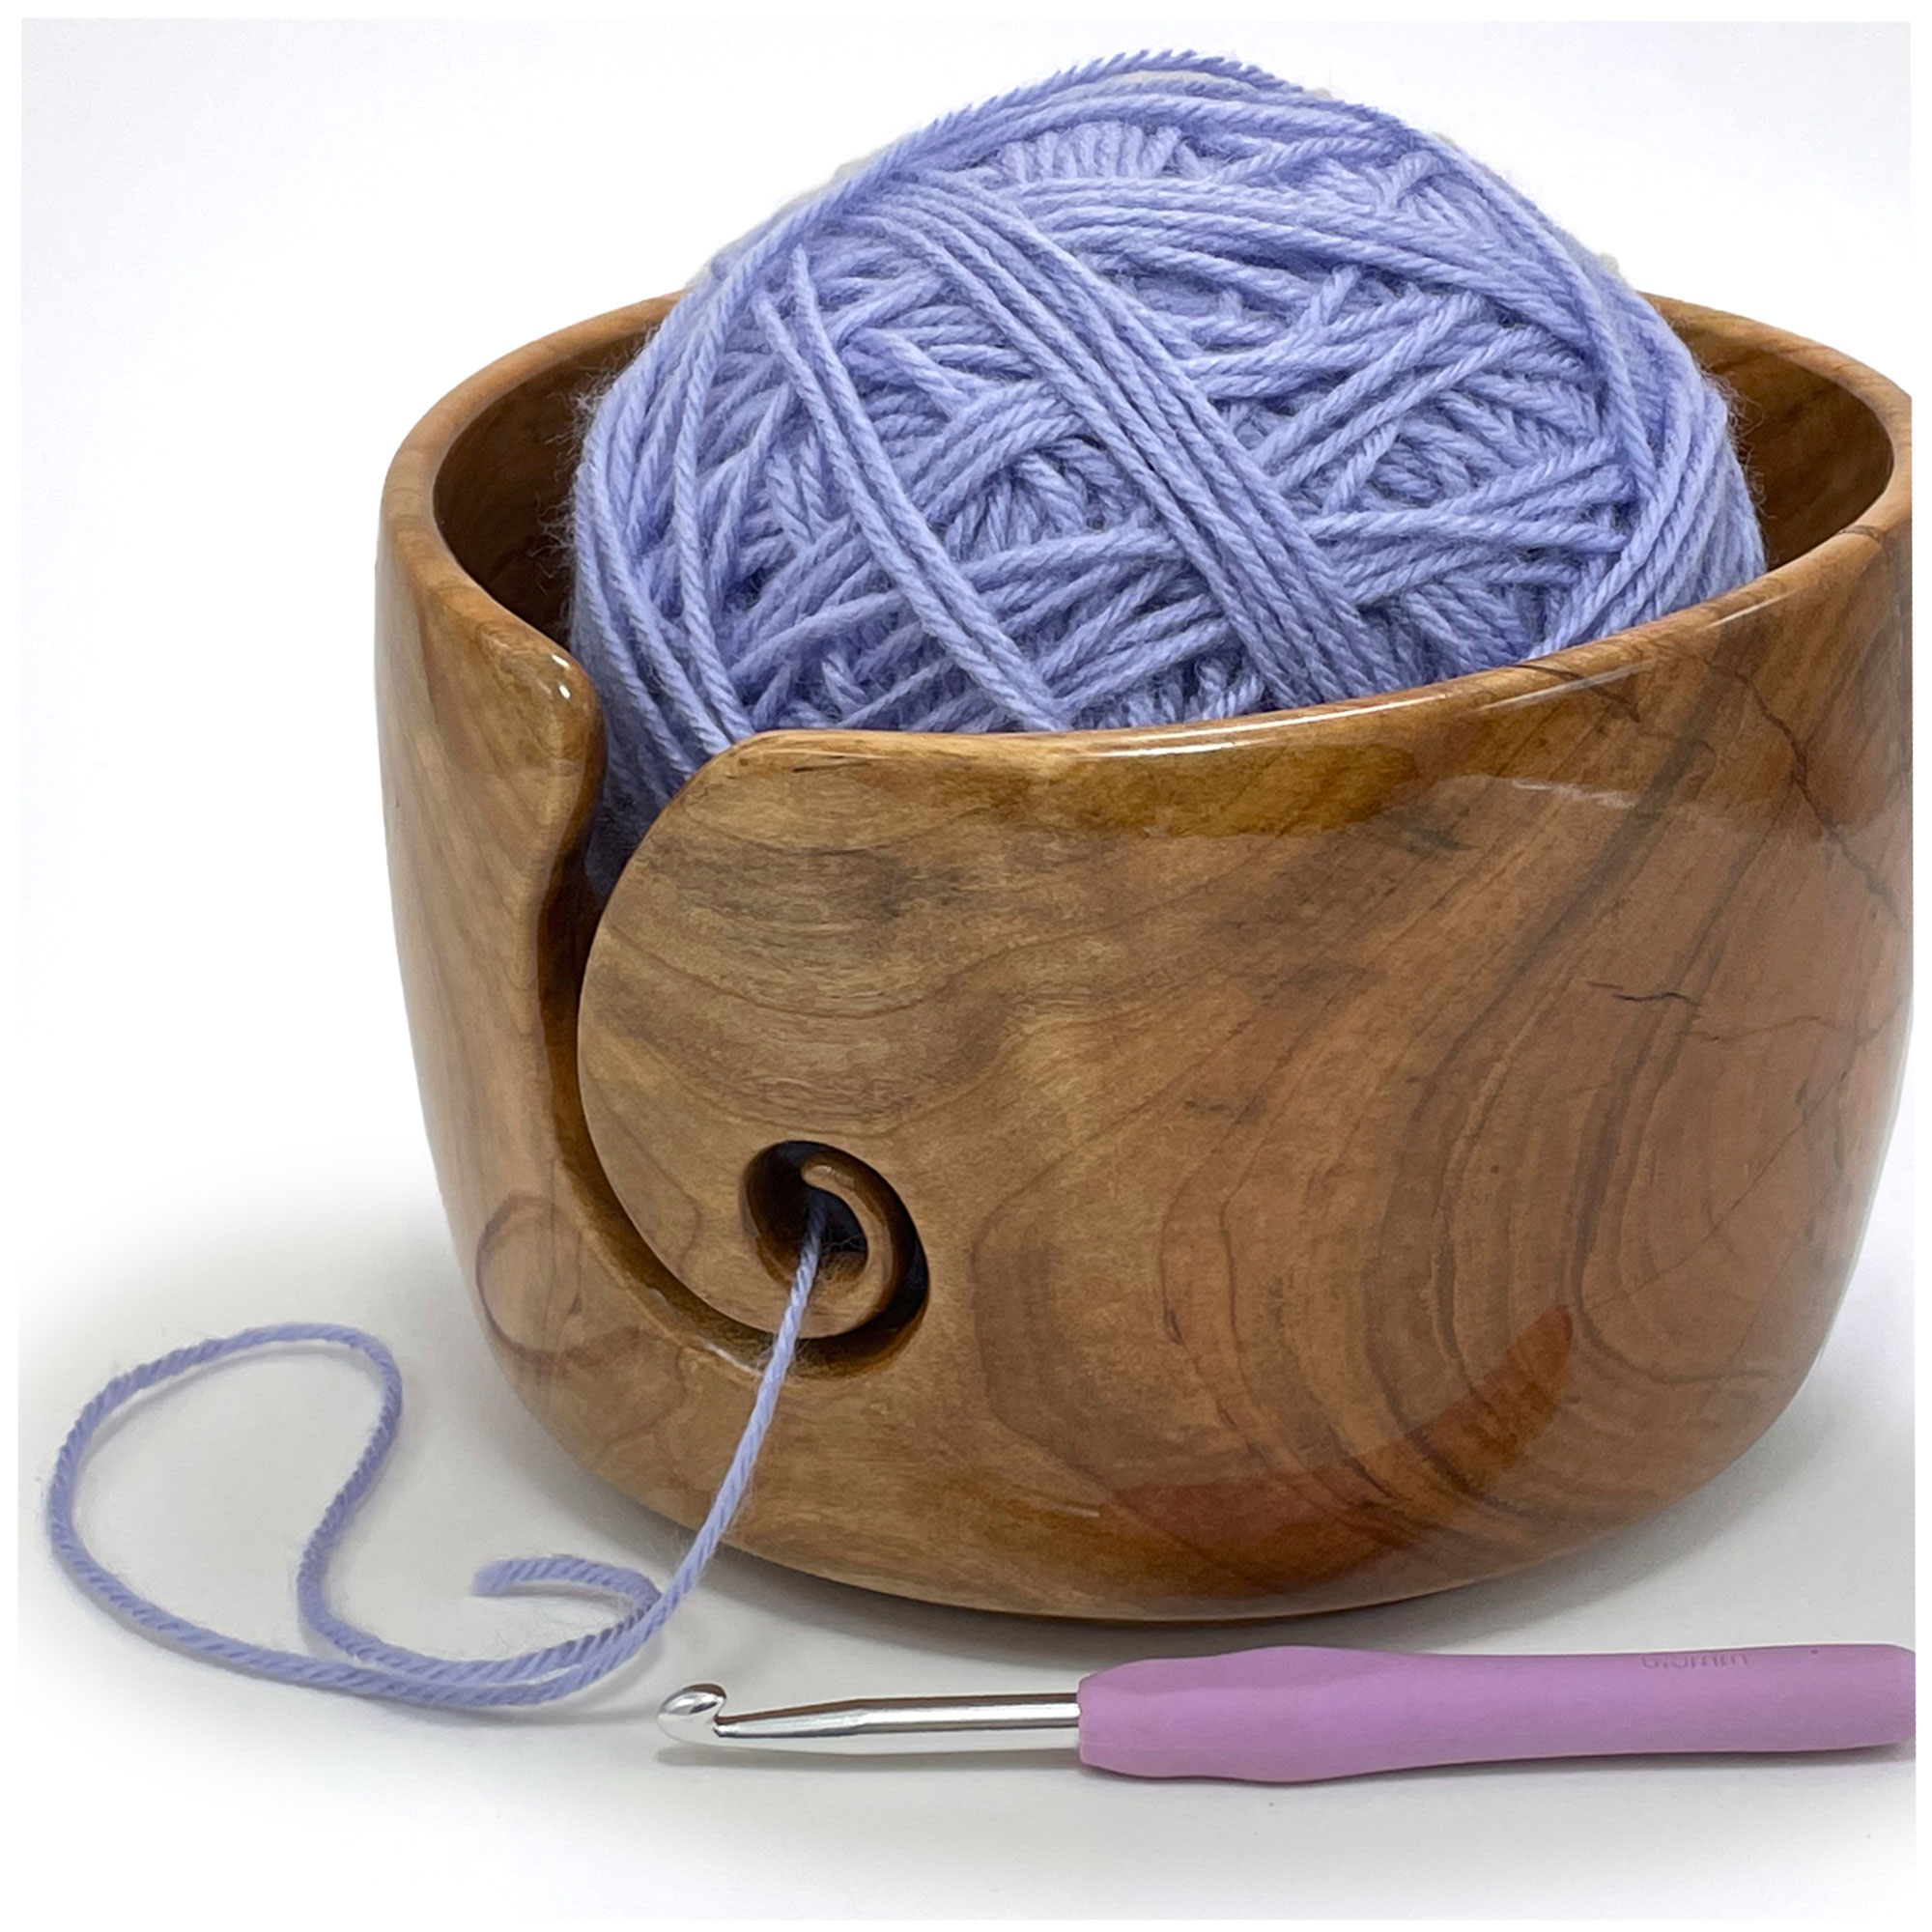 Extra Large Cherry Yarn Bowl with Sparkle Inlay For Knitting, Crochet,  Yarning #700